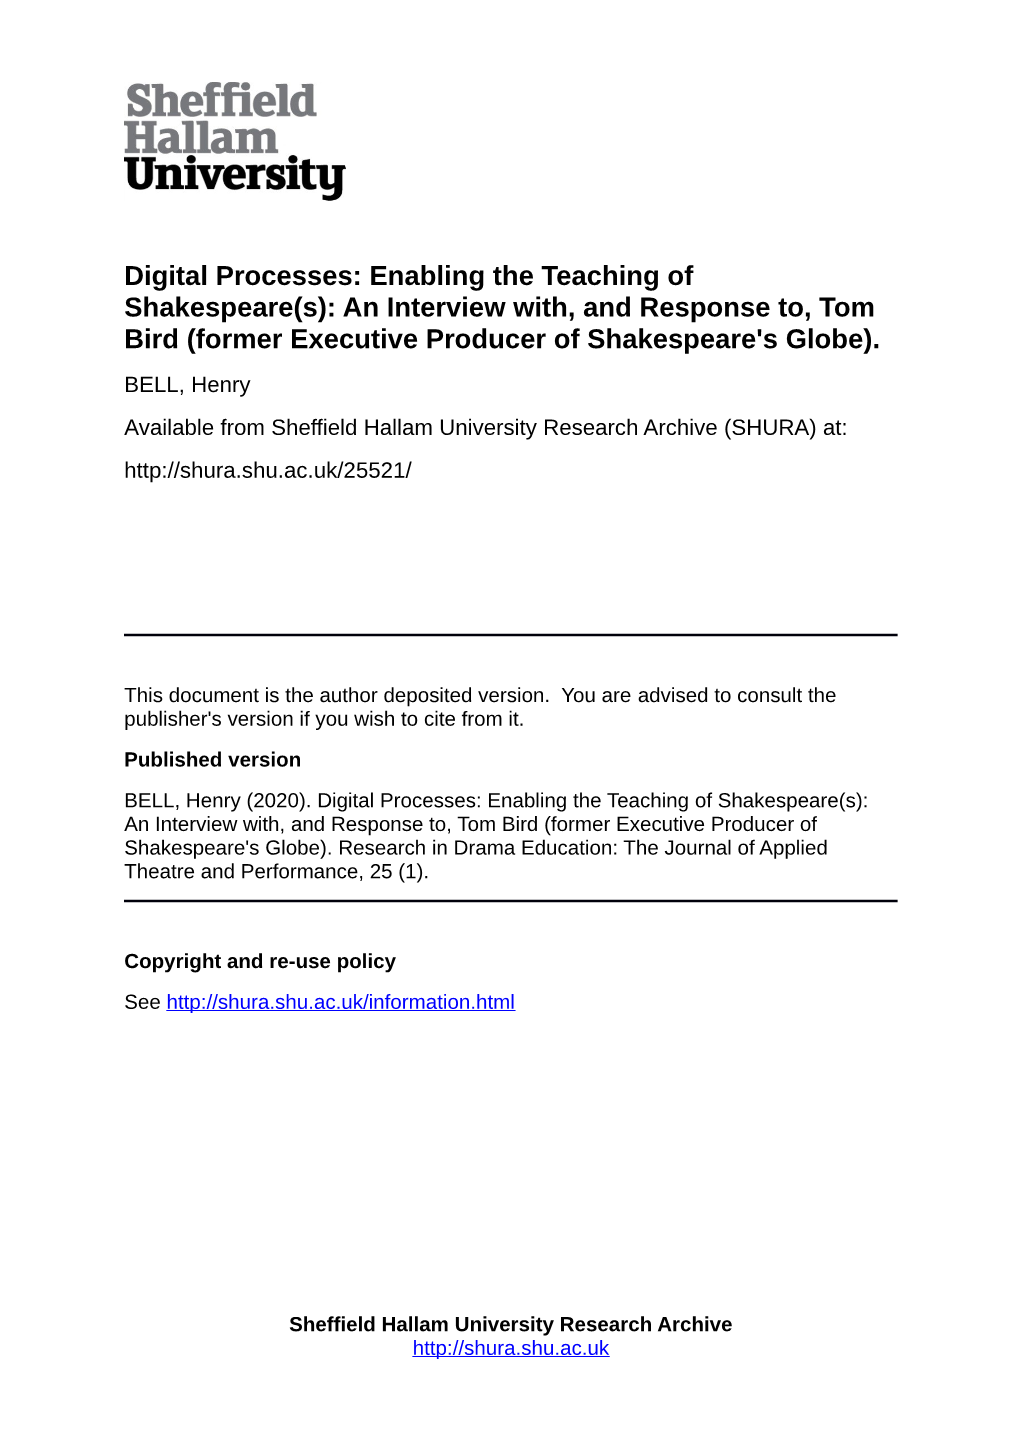 Digital Processes: Enabling the Teaching of Shakespeare(S): an Interview With, and Response To, Tom Bird (Former Executive Producer of Shakespeare's Globe)